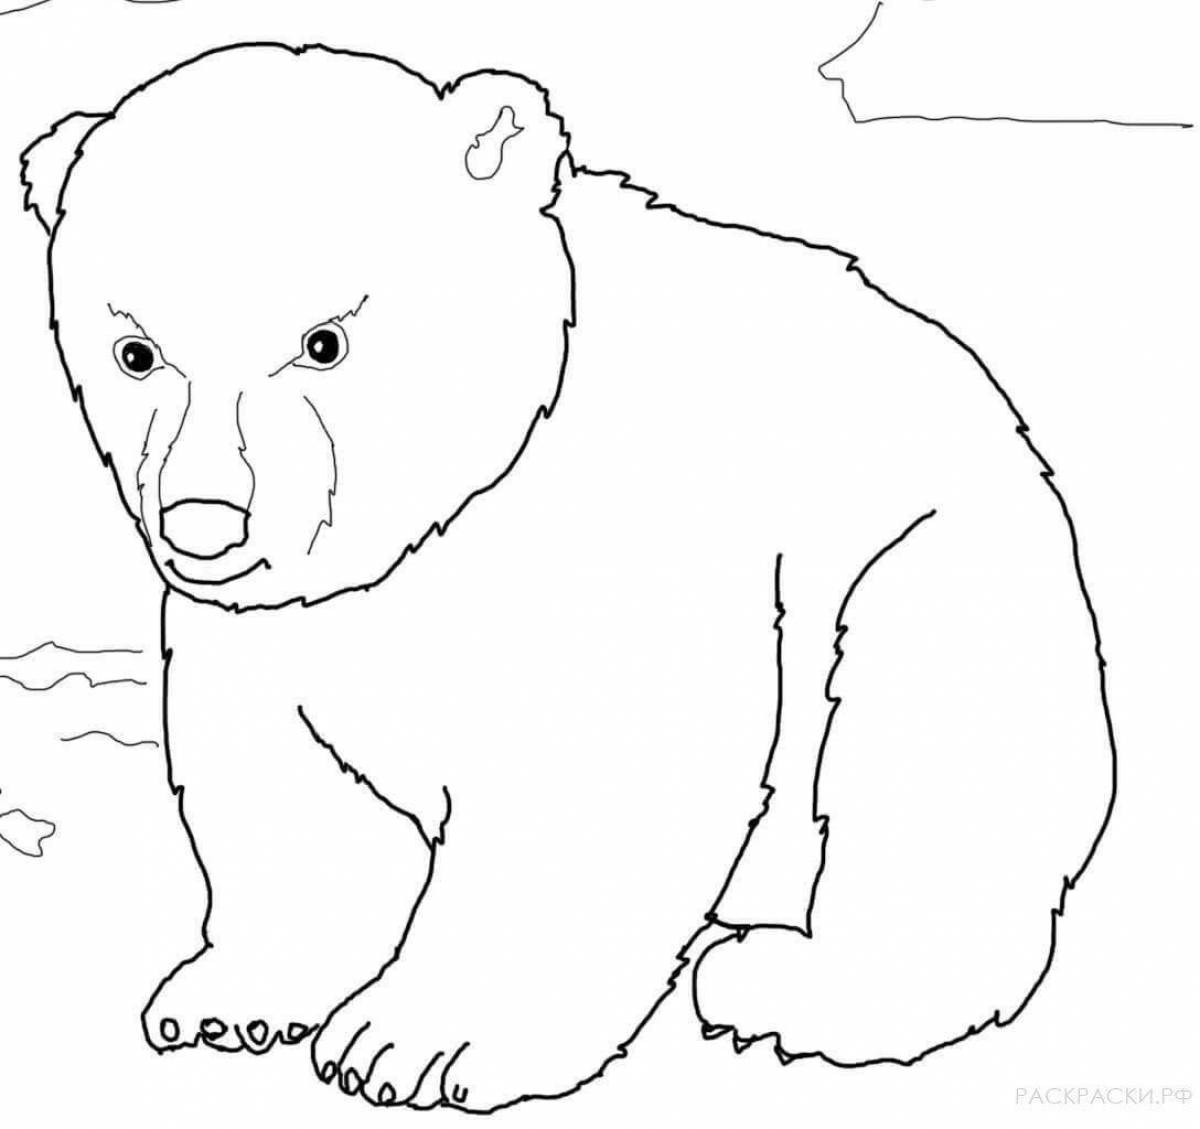 Adorable polar bear coloring book for kids 3-4 years old